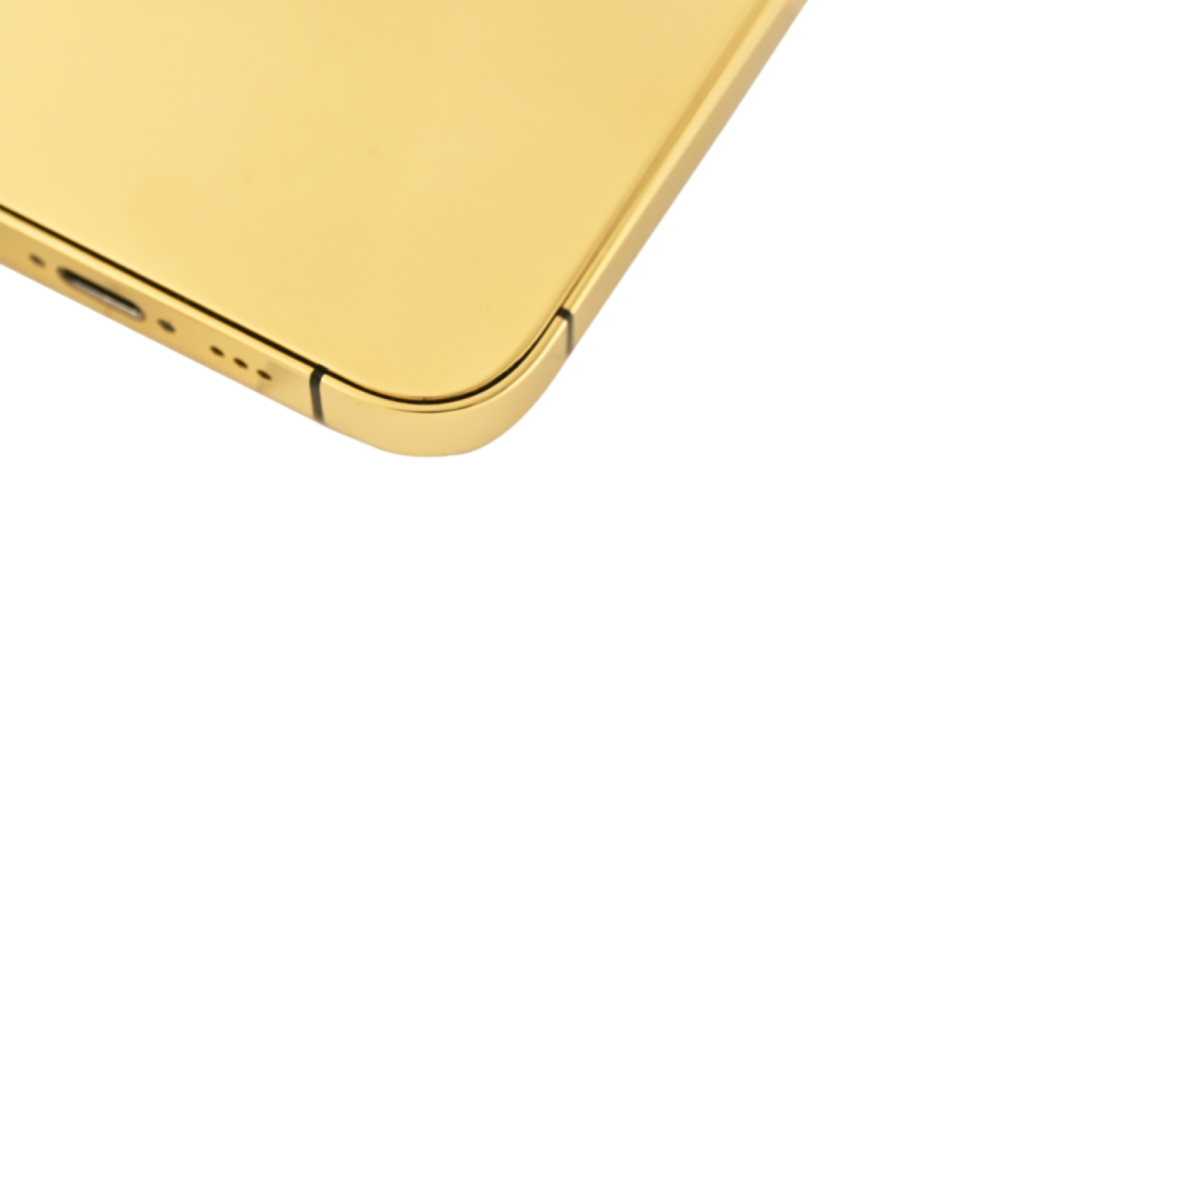 Caviar Luxury 24k Full Gold Customized iPhone 14 Pro 512 GB Limited Edition